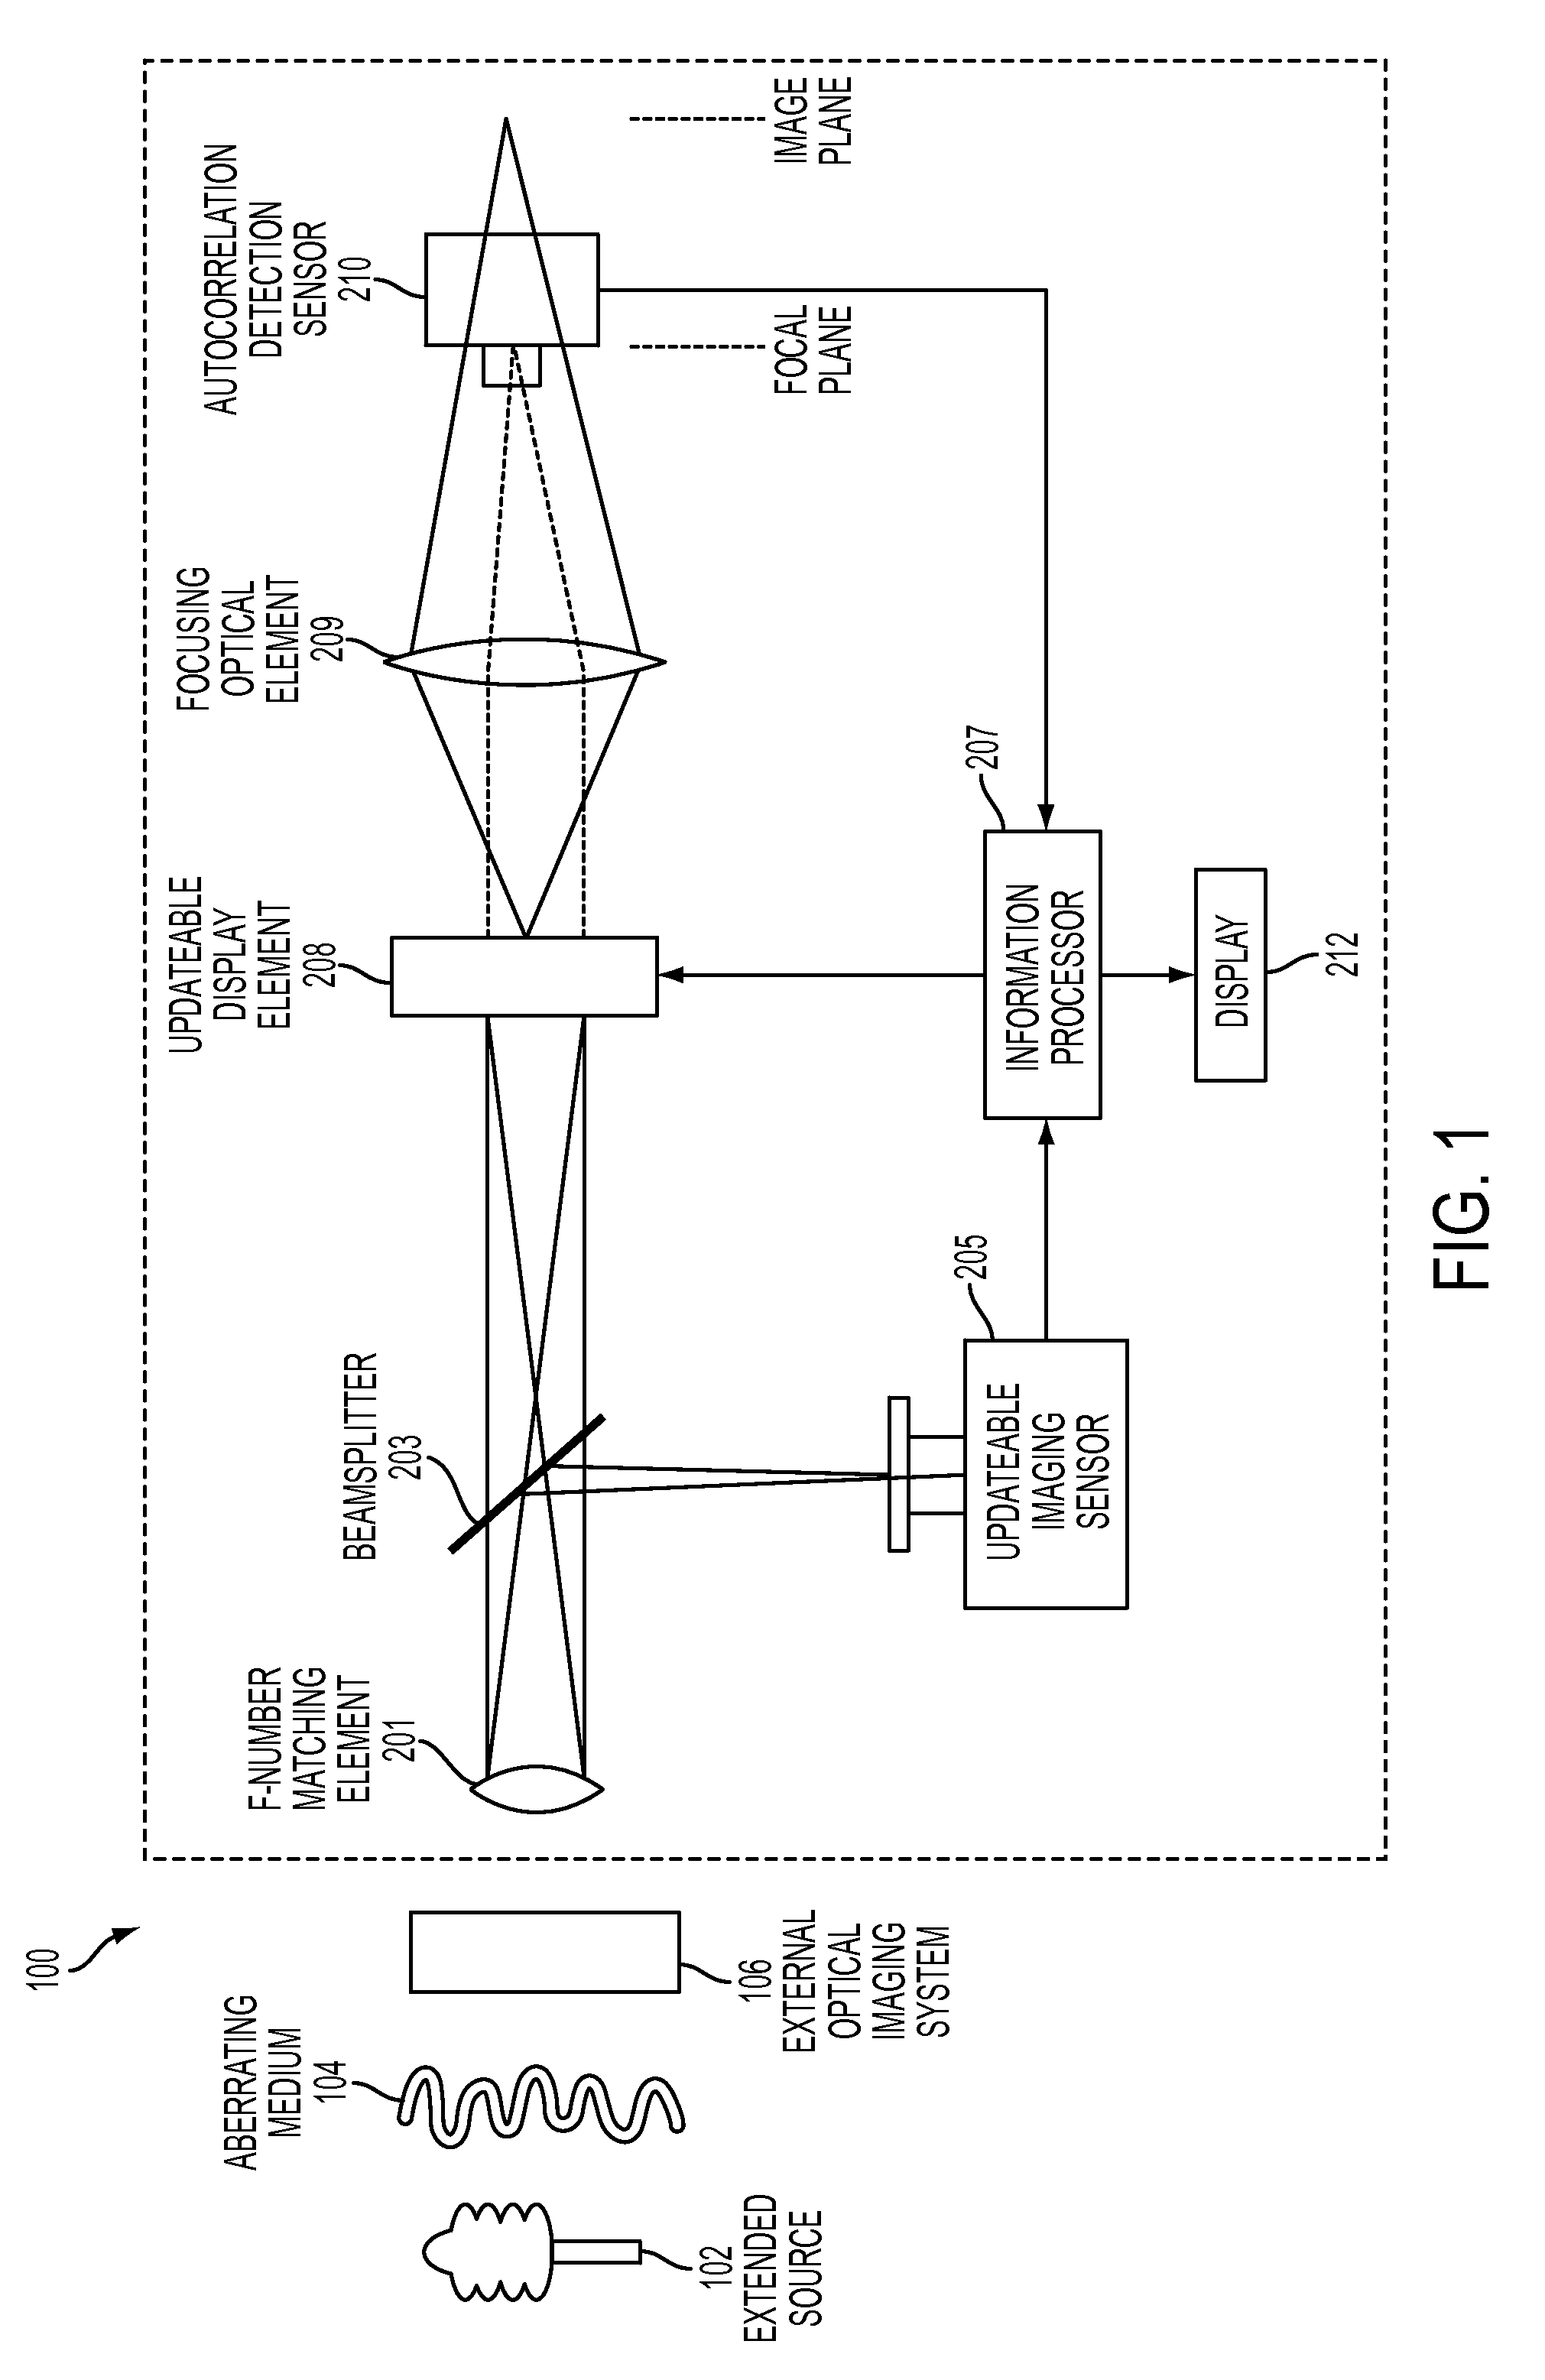 Extended source wavefront sensor through optical correlation with a change in centroid position of light corresponding to a magnitude of tip/tilt aberration of optical jitter